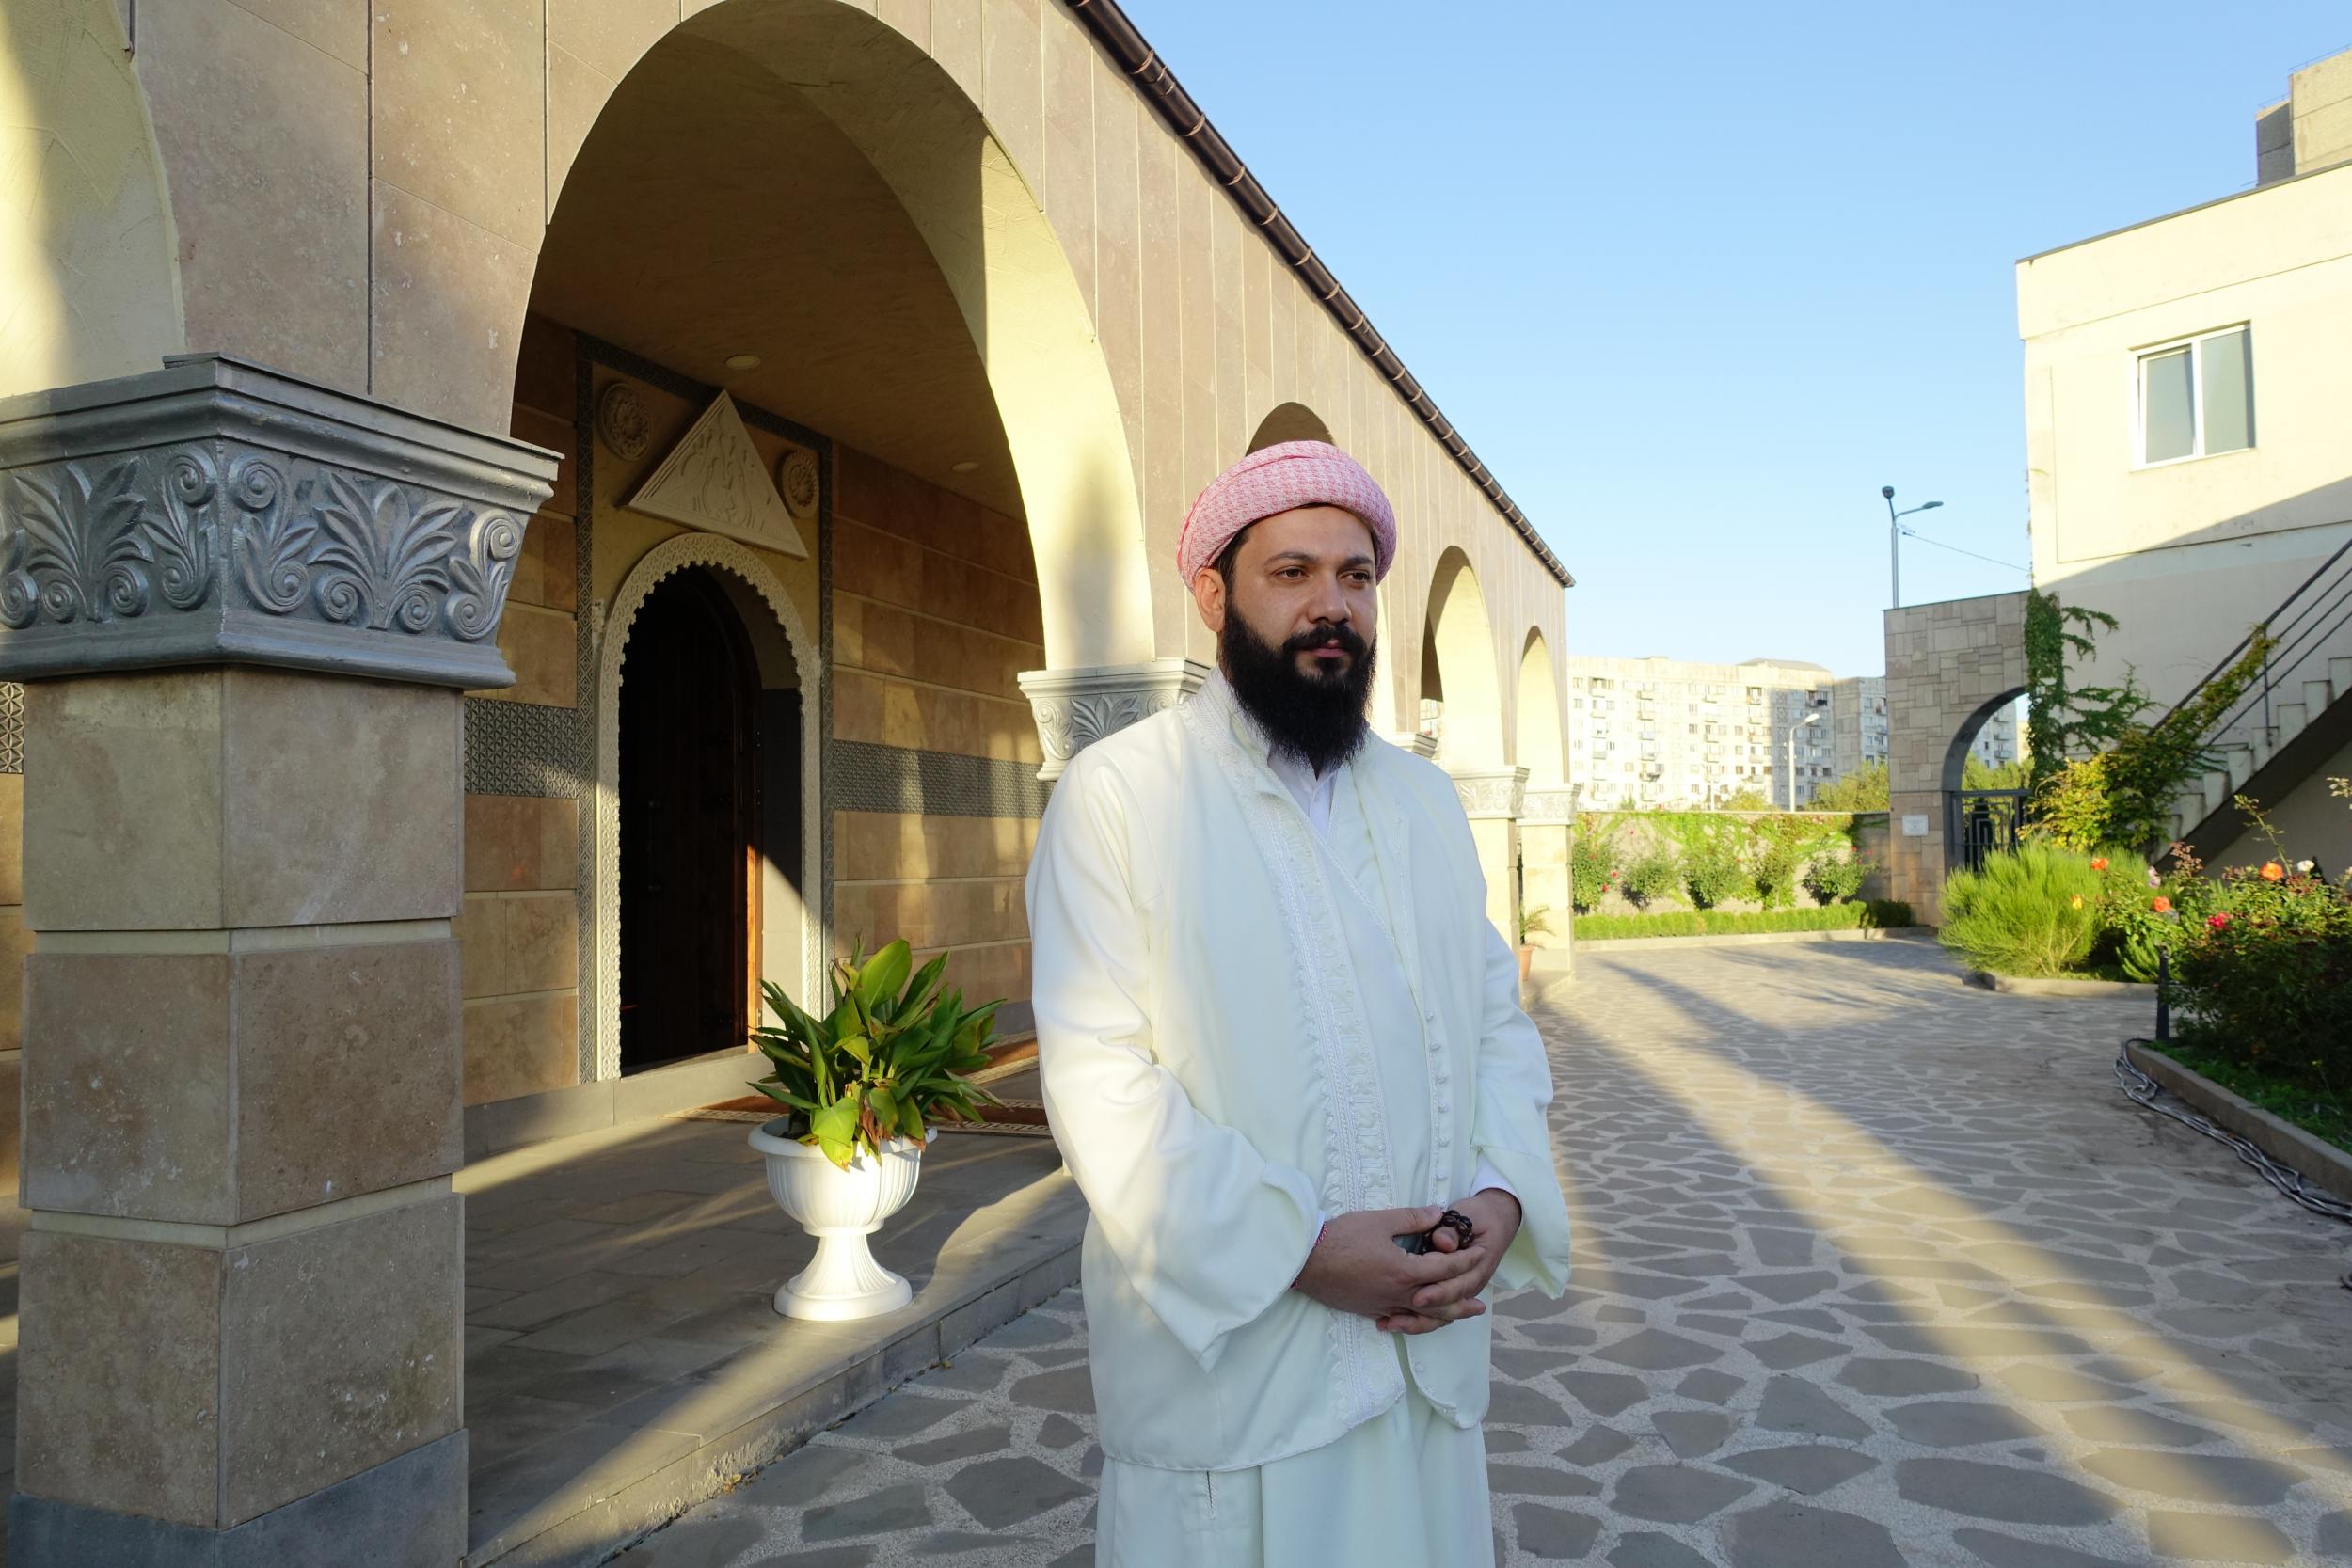 'Our community was dying out,' says Dimitri Pirbari, the temple’s spiritual leader